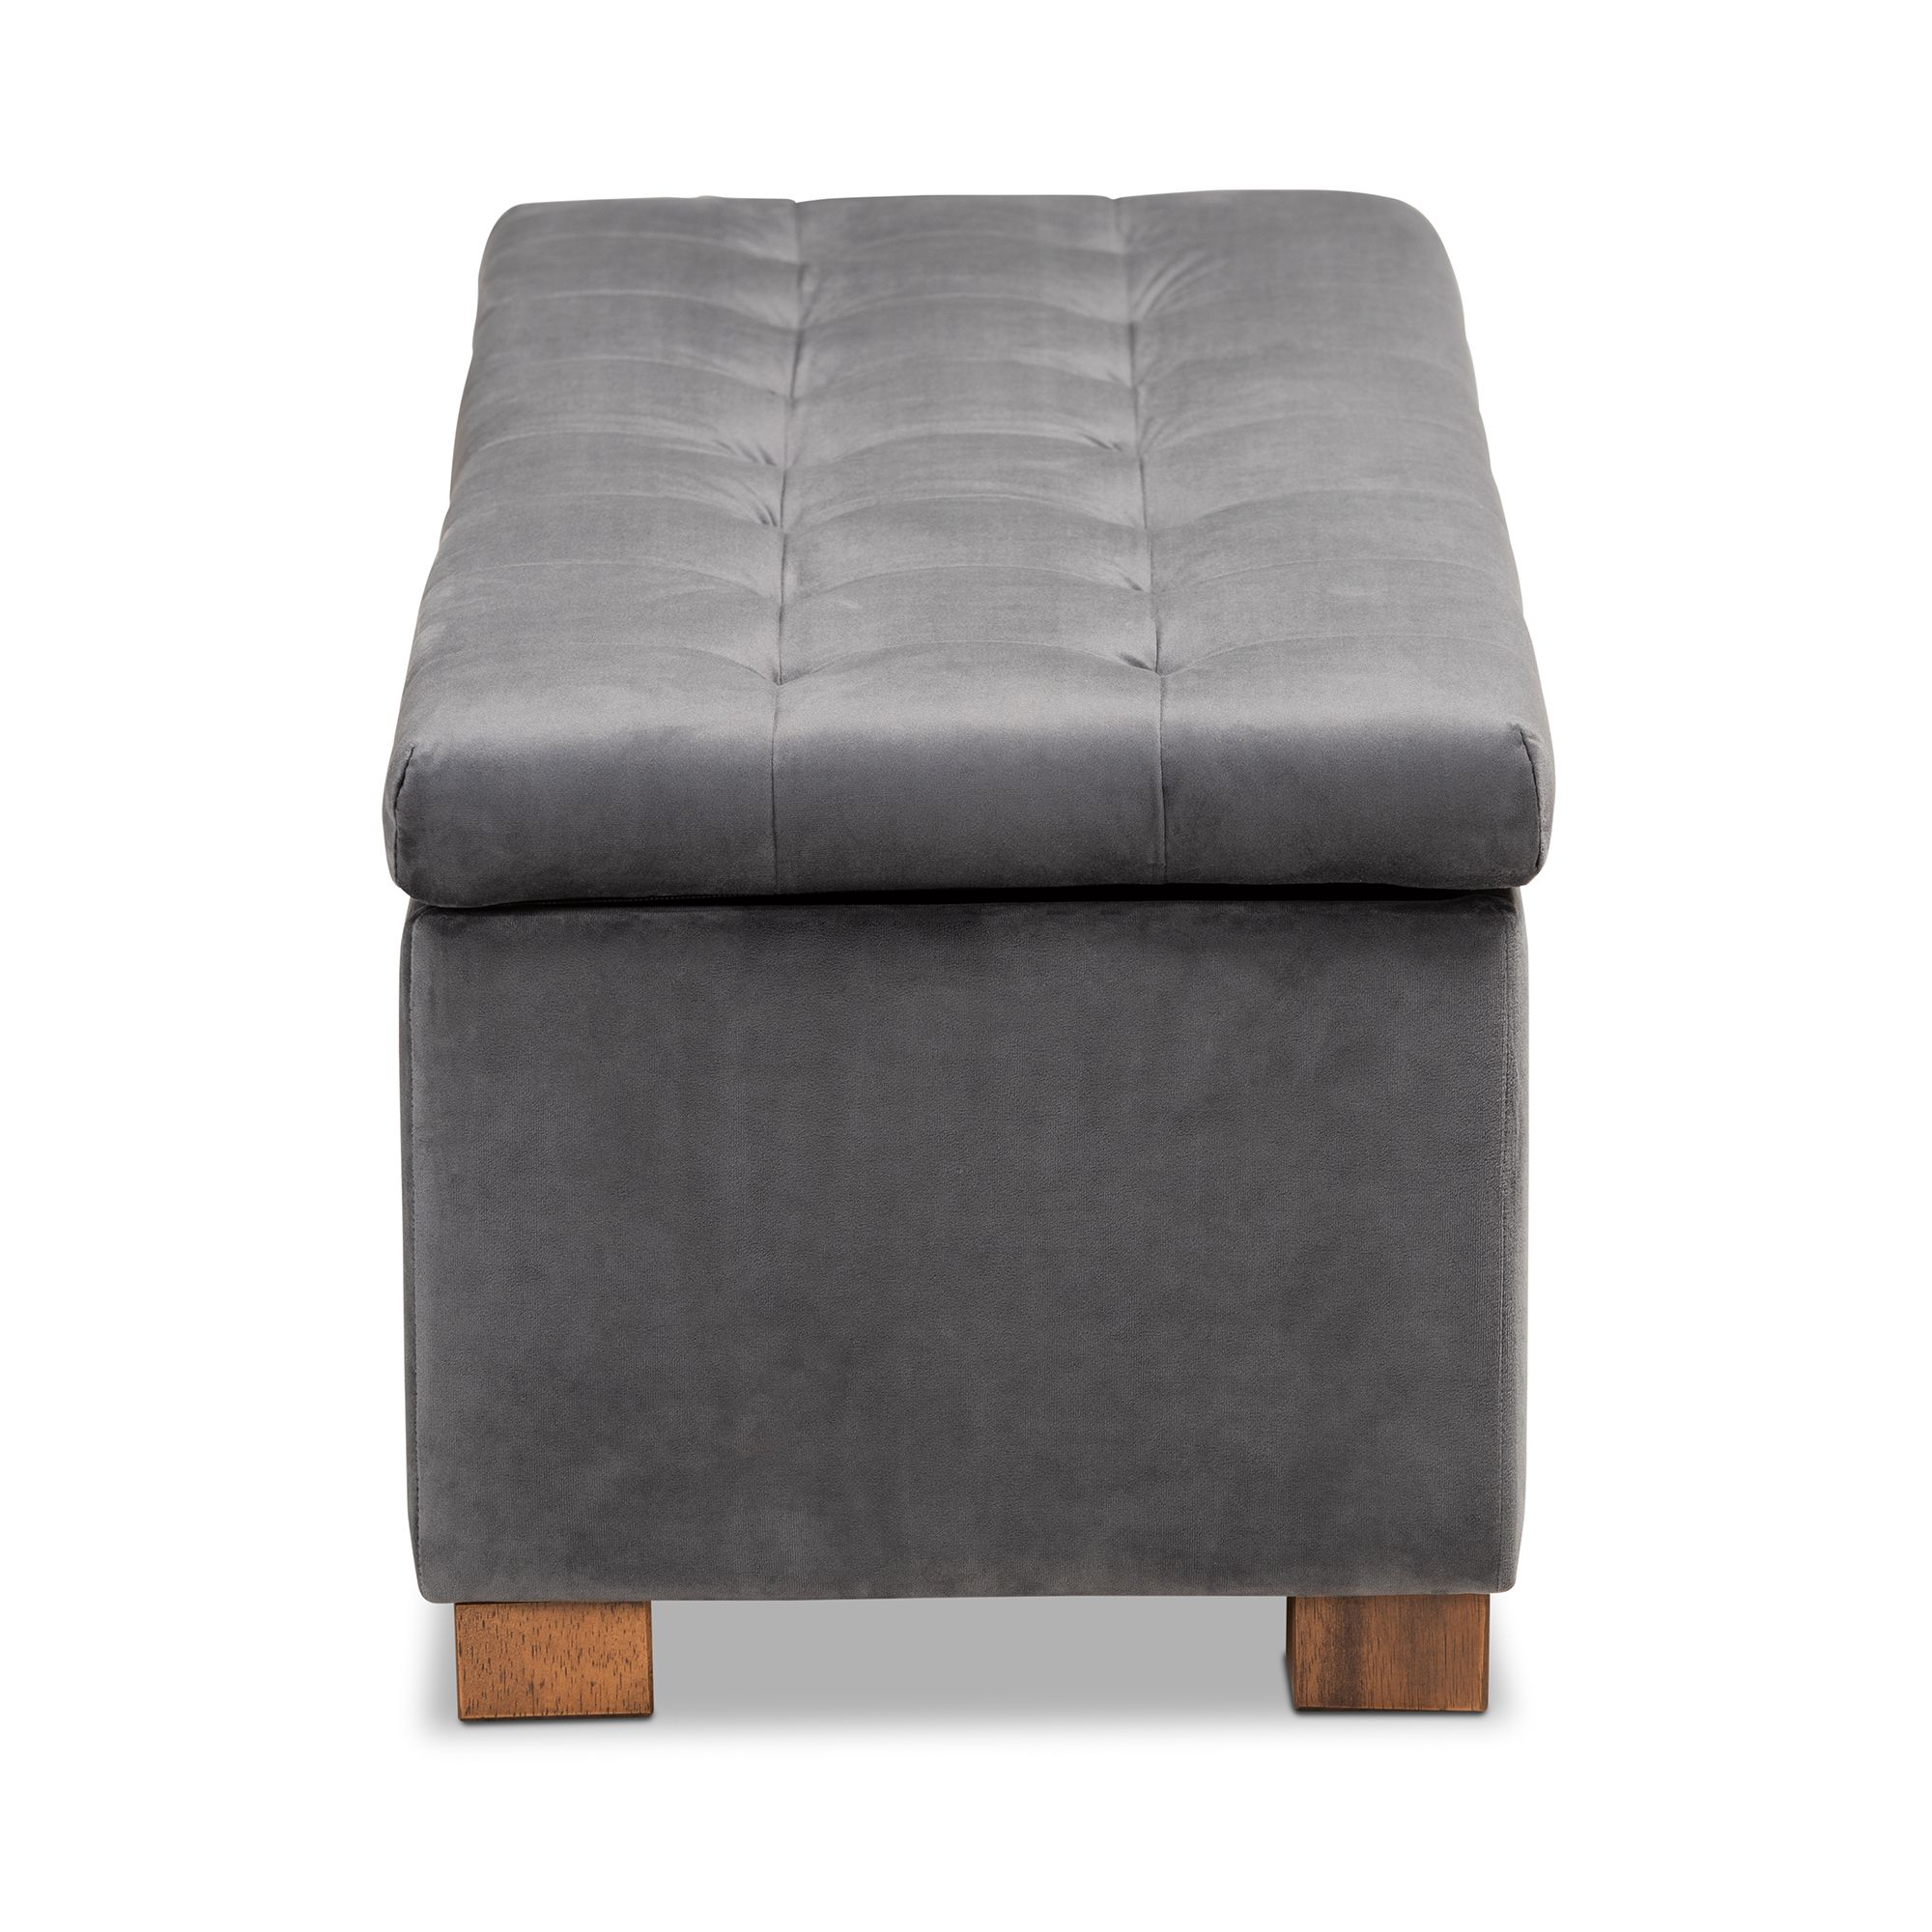 Most Recently Released Roanoke Contemporary Grid Tufted Velvet Upholstered 46" Storage Bench With Regard To Charcoal Gray Velvet Tufted Rectangular Ottoman Benches (View 9 of 10)